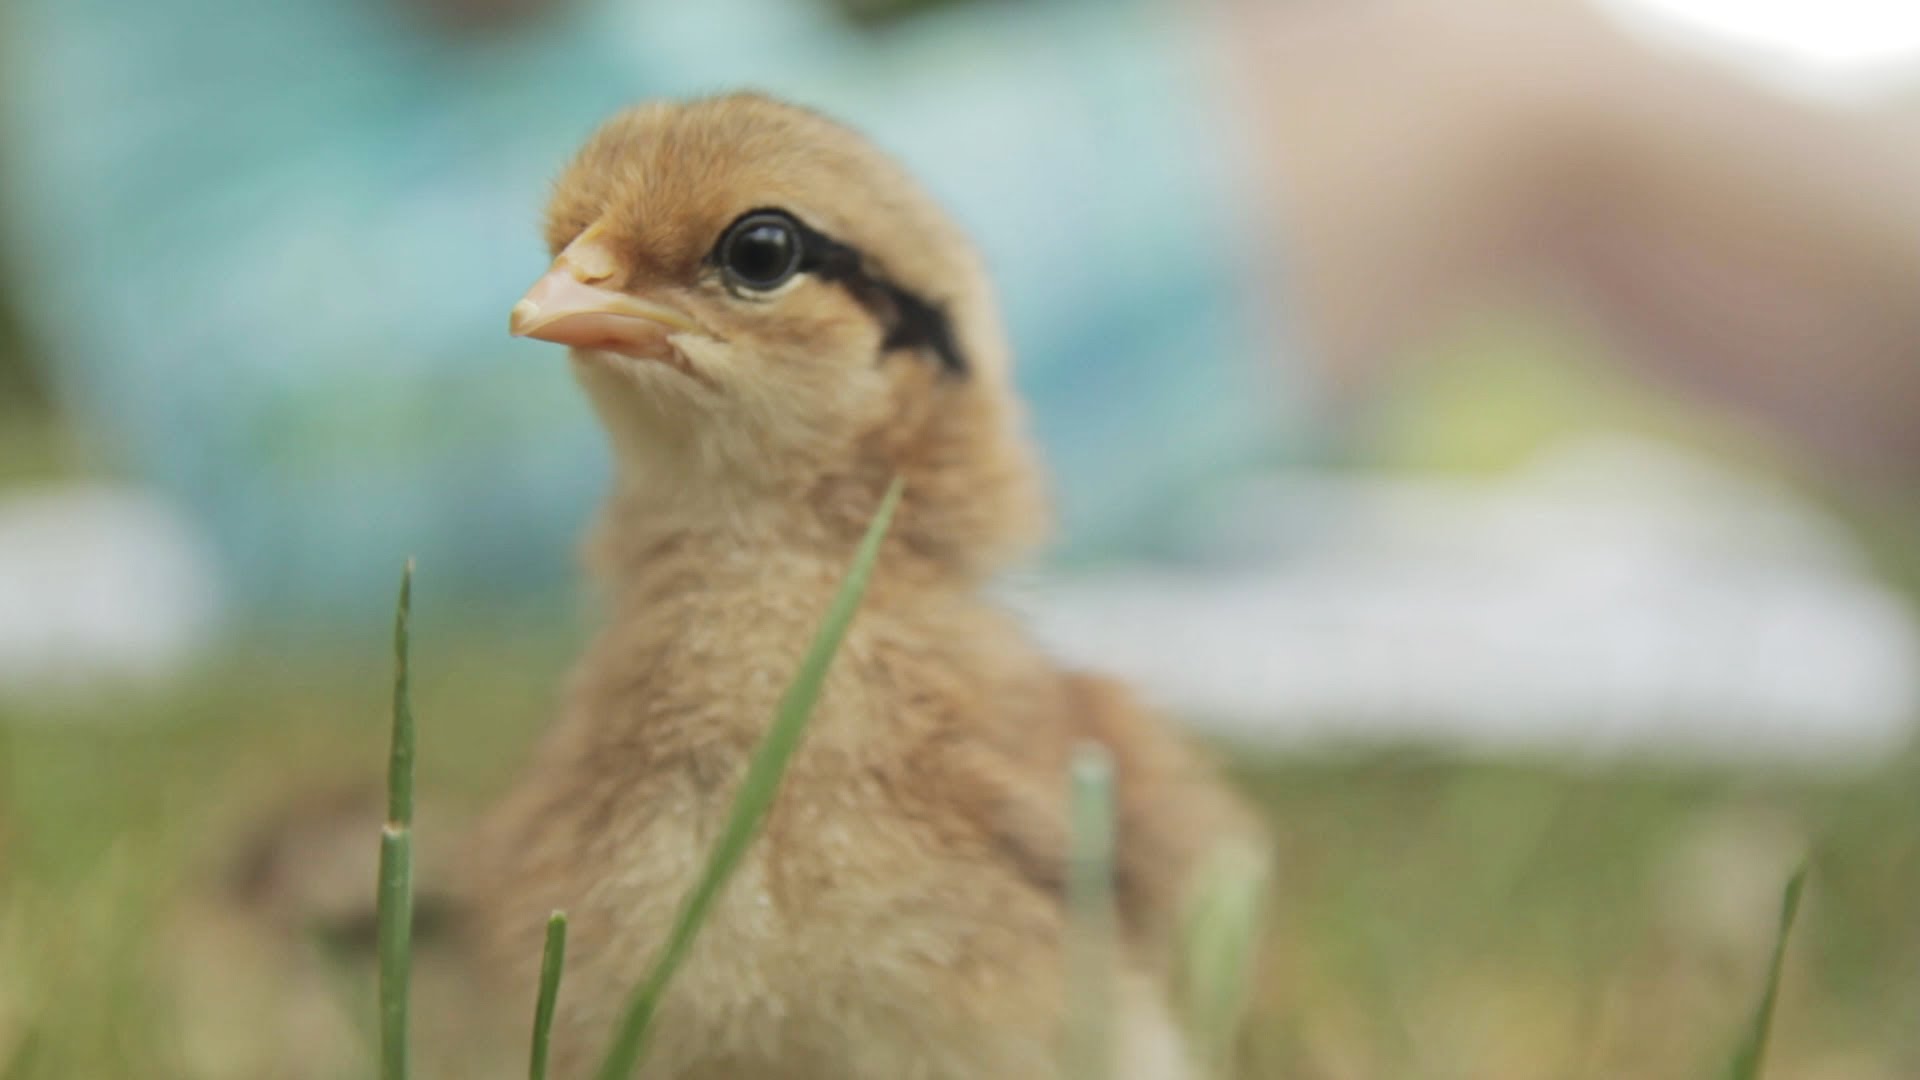 Cute Two Day Old Baby Chickens - YouTube